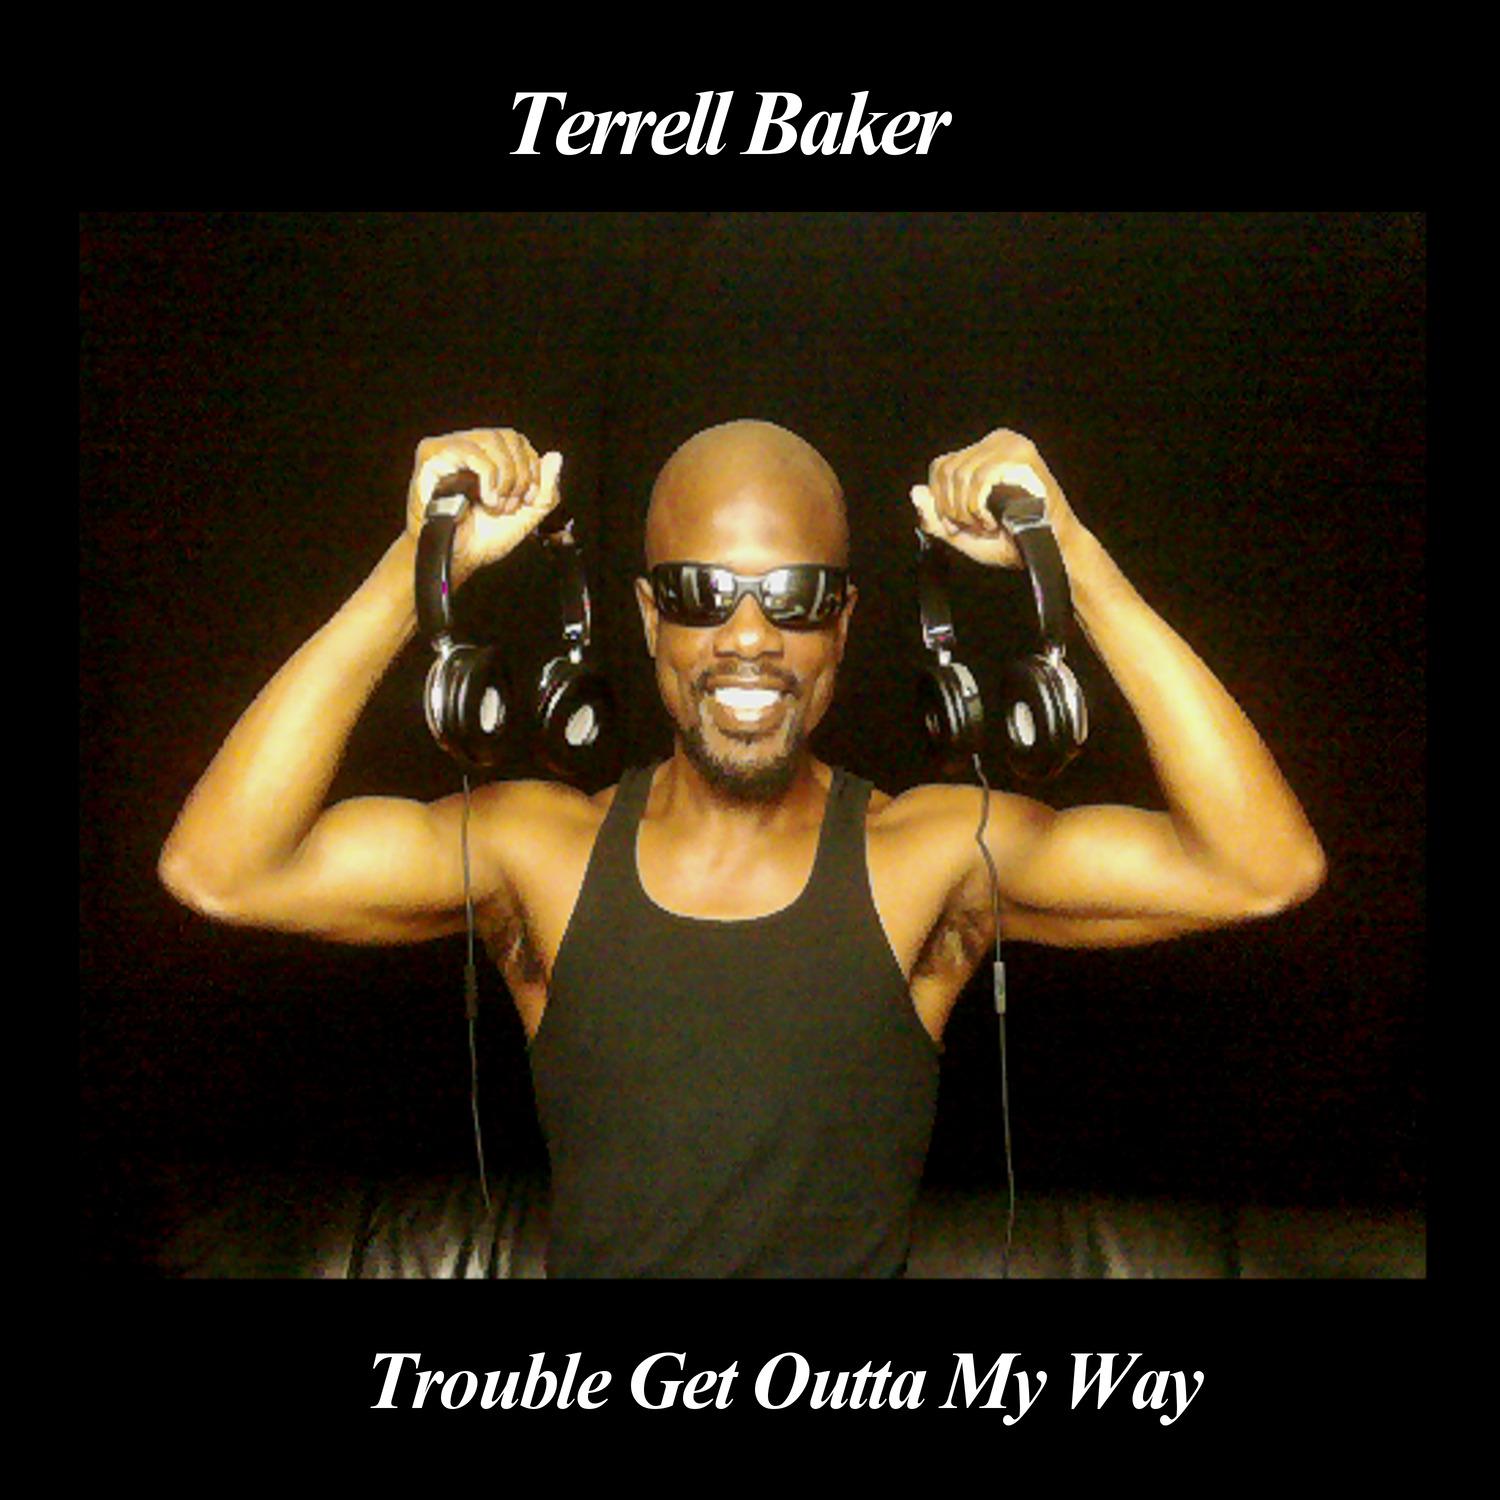 Terrell Baker - Don’t Give Up